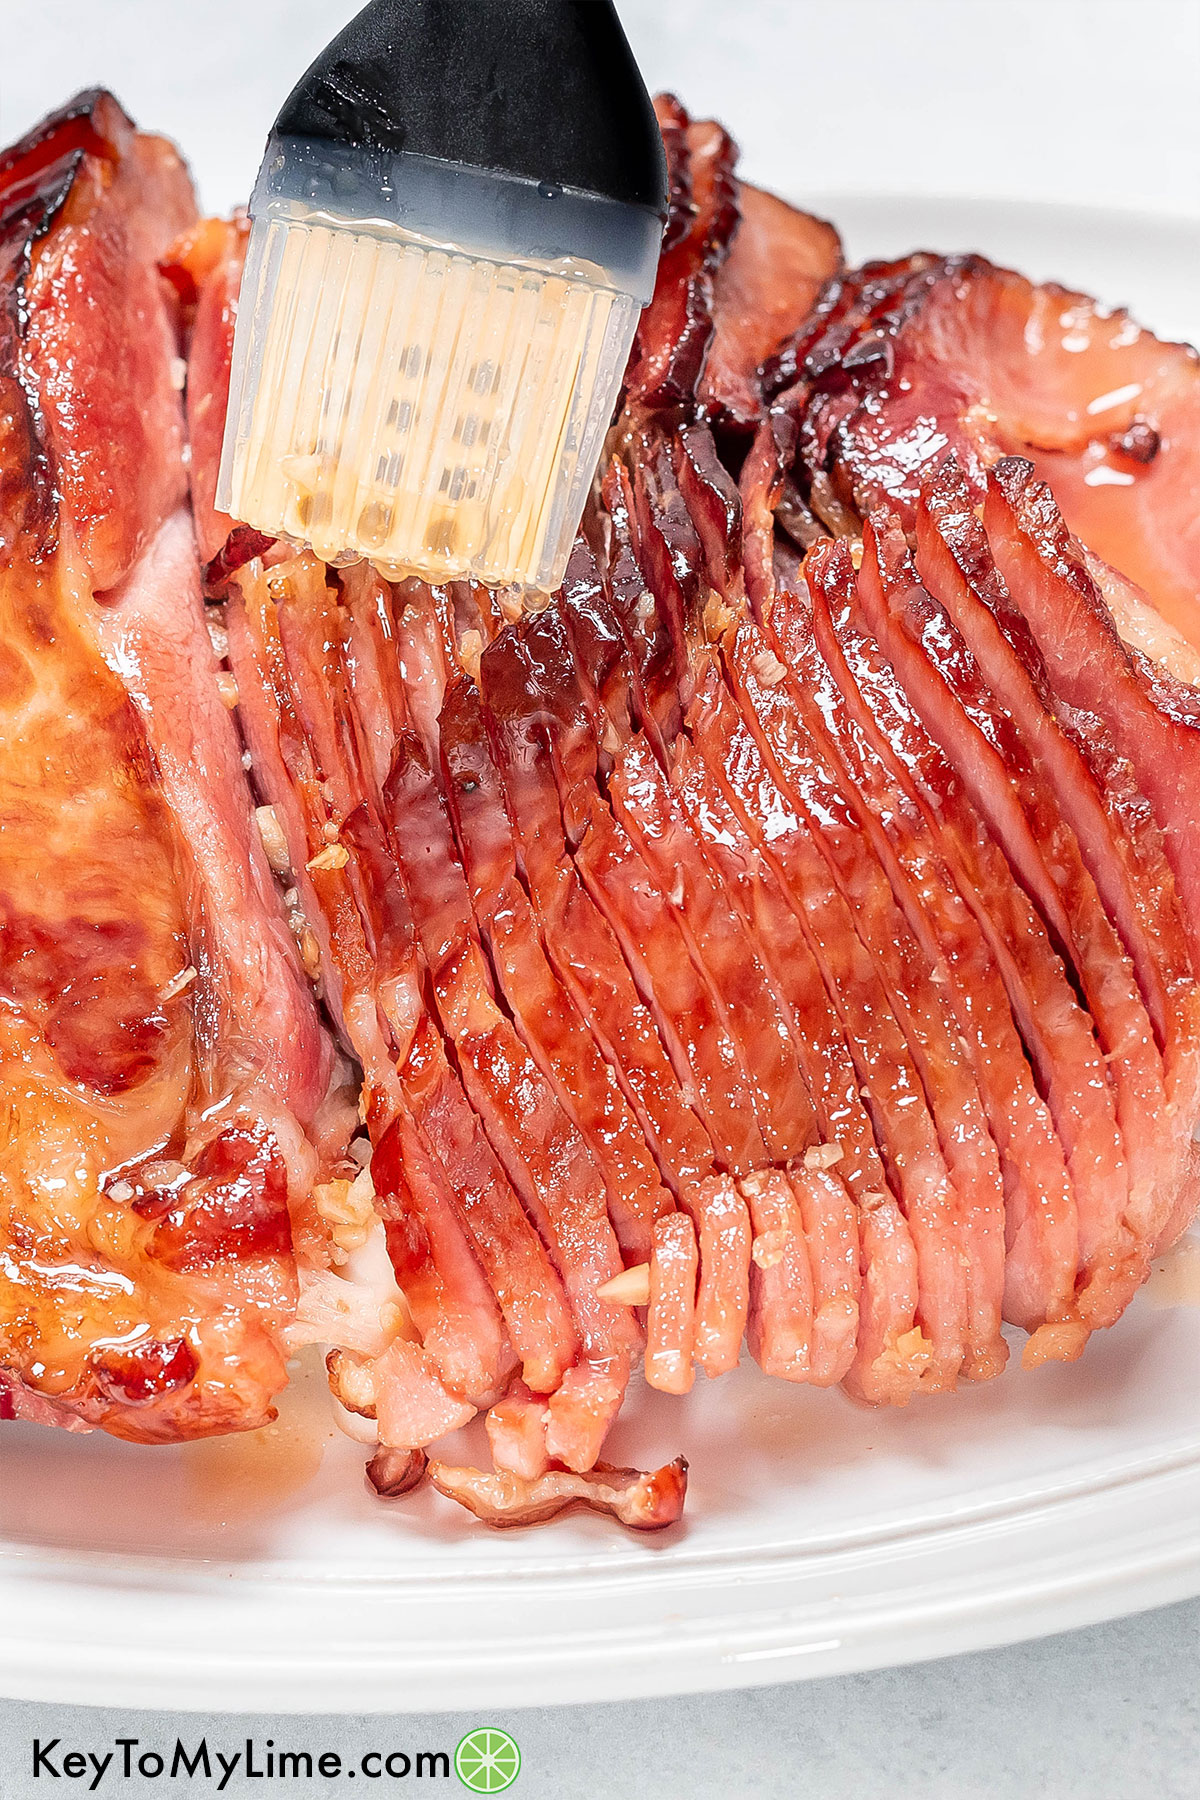 Brushing the ham with the glaze after being broiled in the oven.